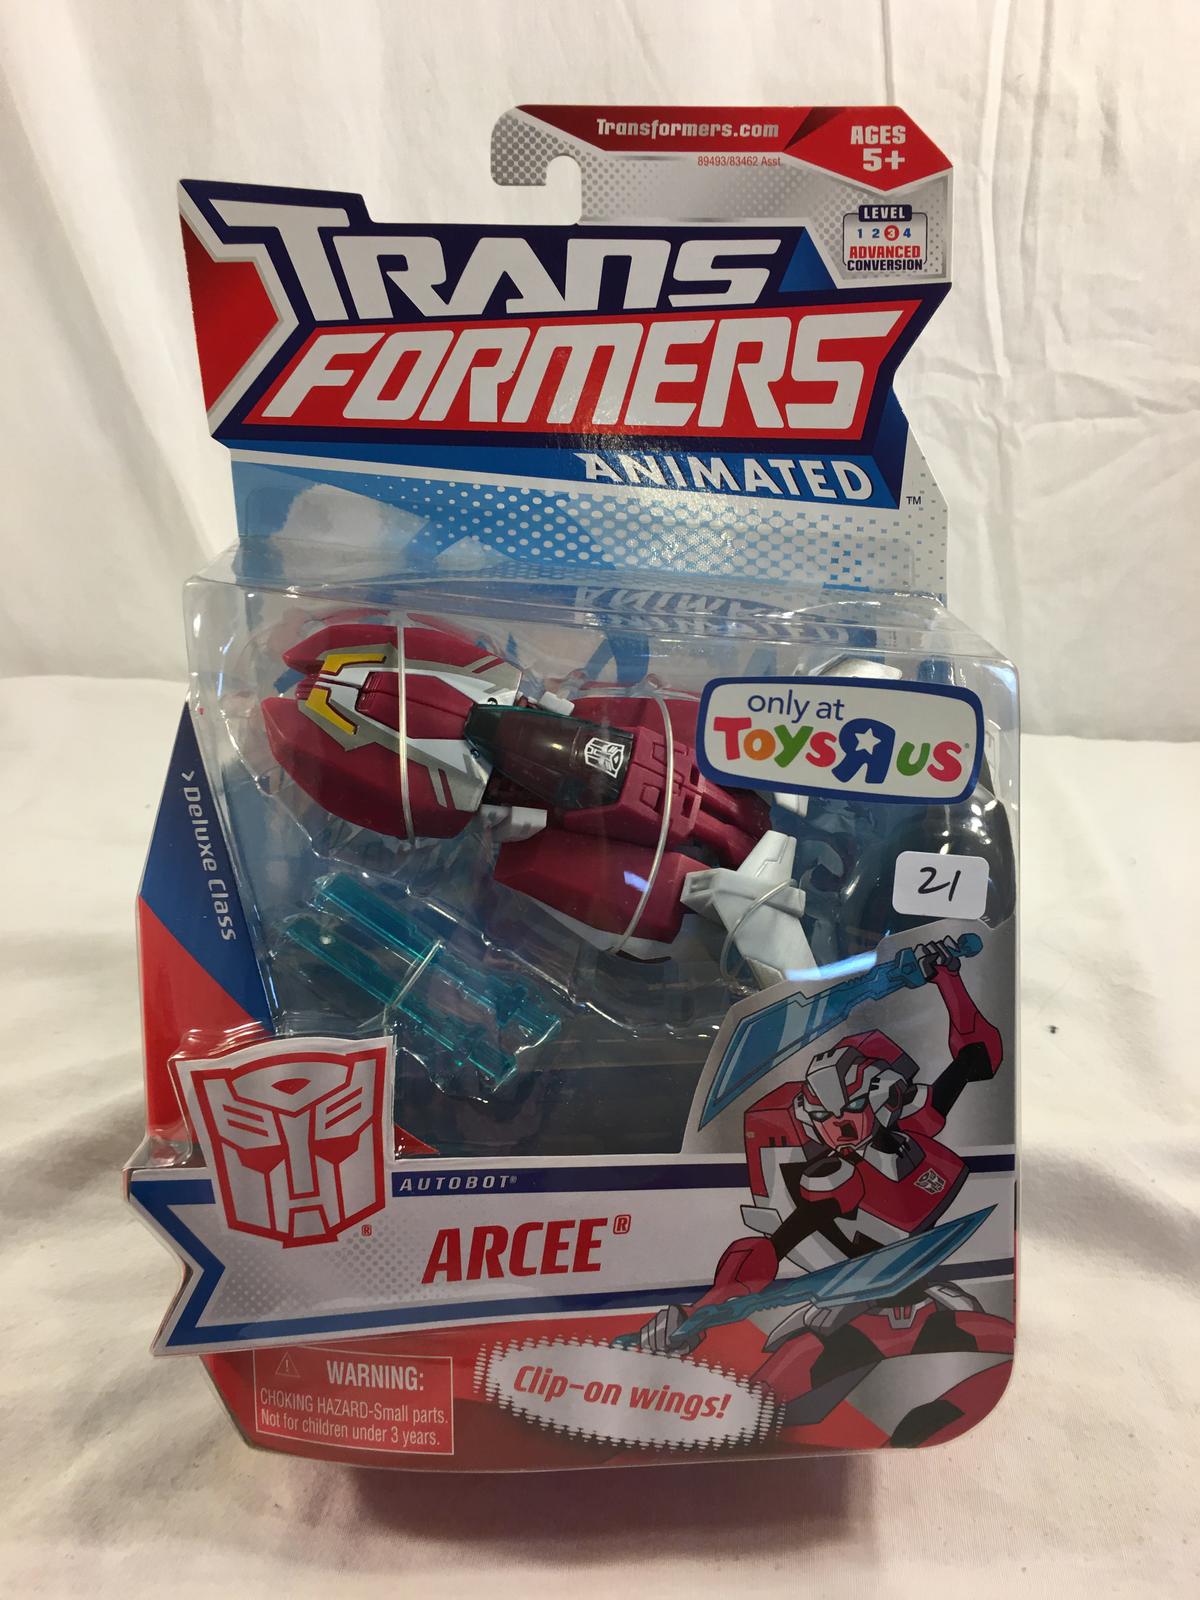 Collector Hasbro Transformers Animated Arcee Autobot Deluxe Class 12"